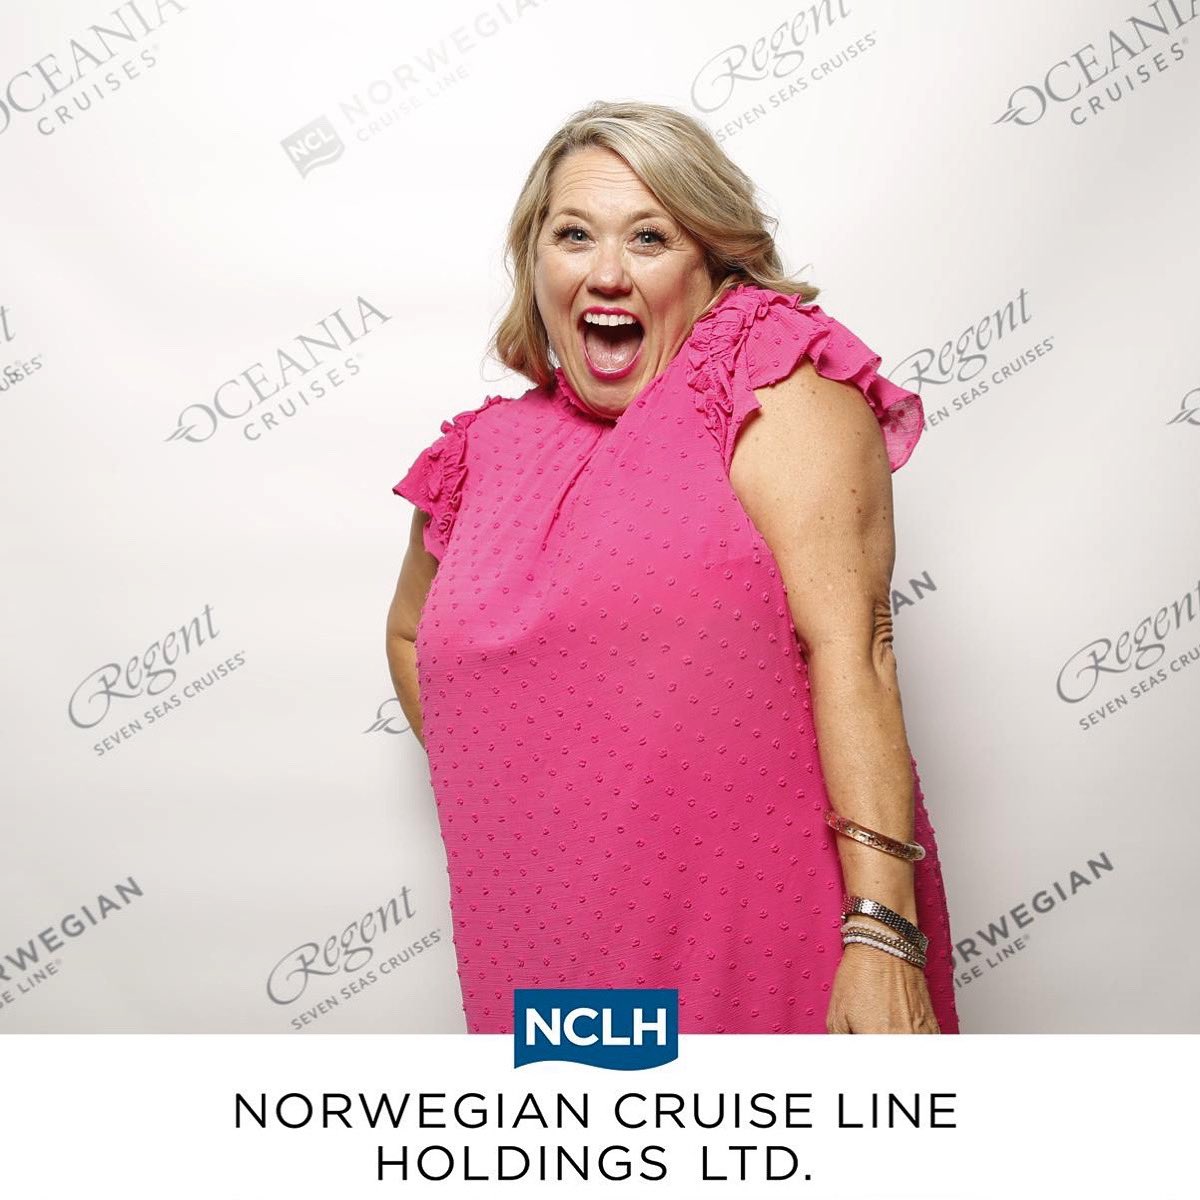 Imagine being surrounded by the coolest leaders in the cruising industry! That was me, in Vegas, at the Norwegian Cruise Lines special cocktail event as part of Virtuoso Travel Week. As the #KeynoteSpeaker for NCL, I could not be more exited to serve this wonderful team!